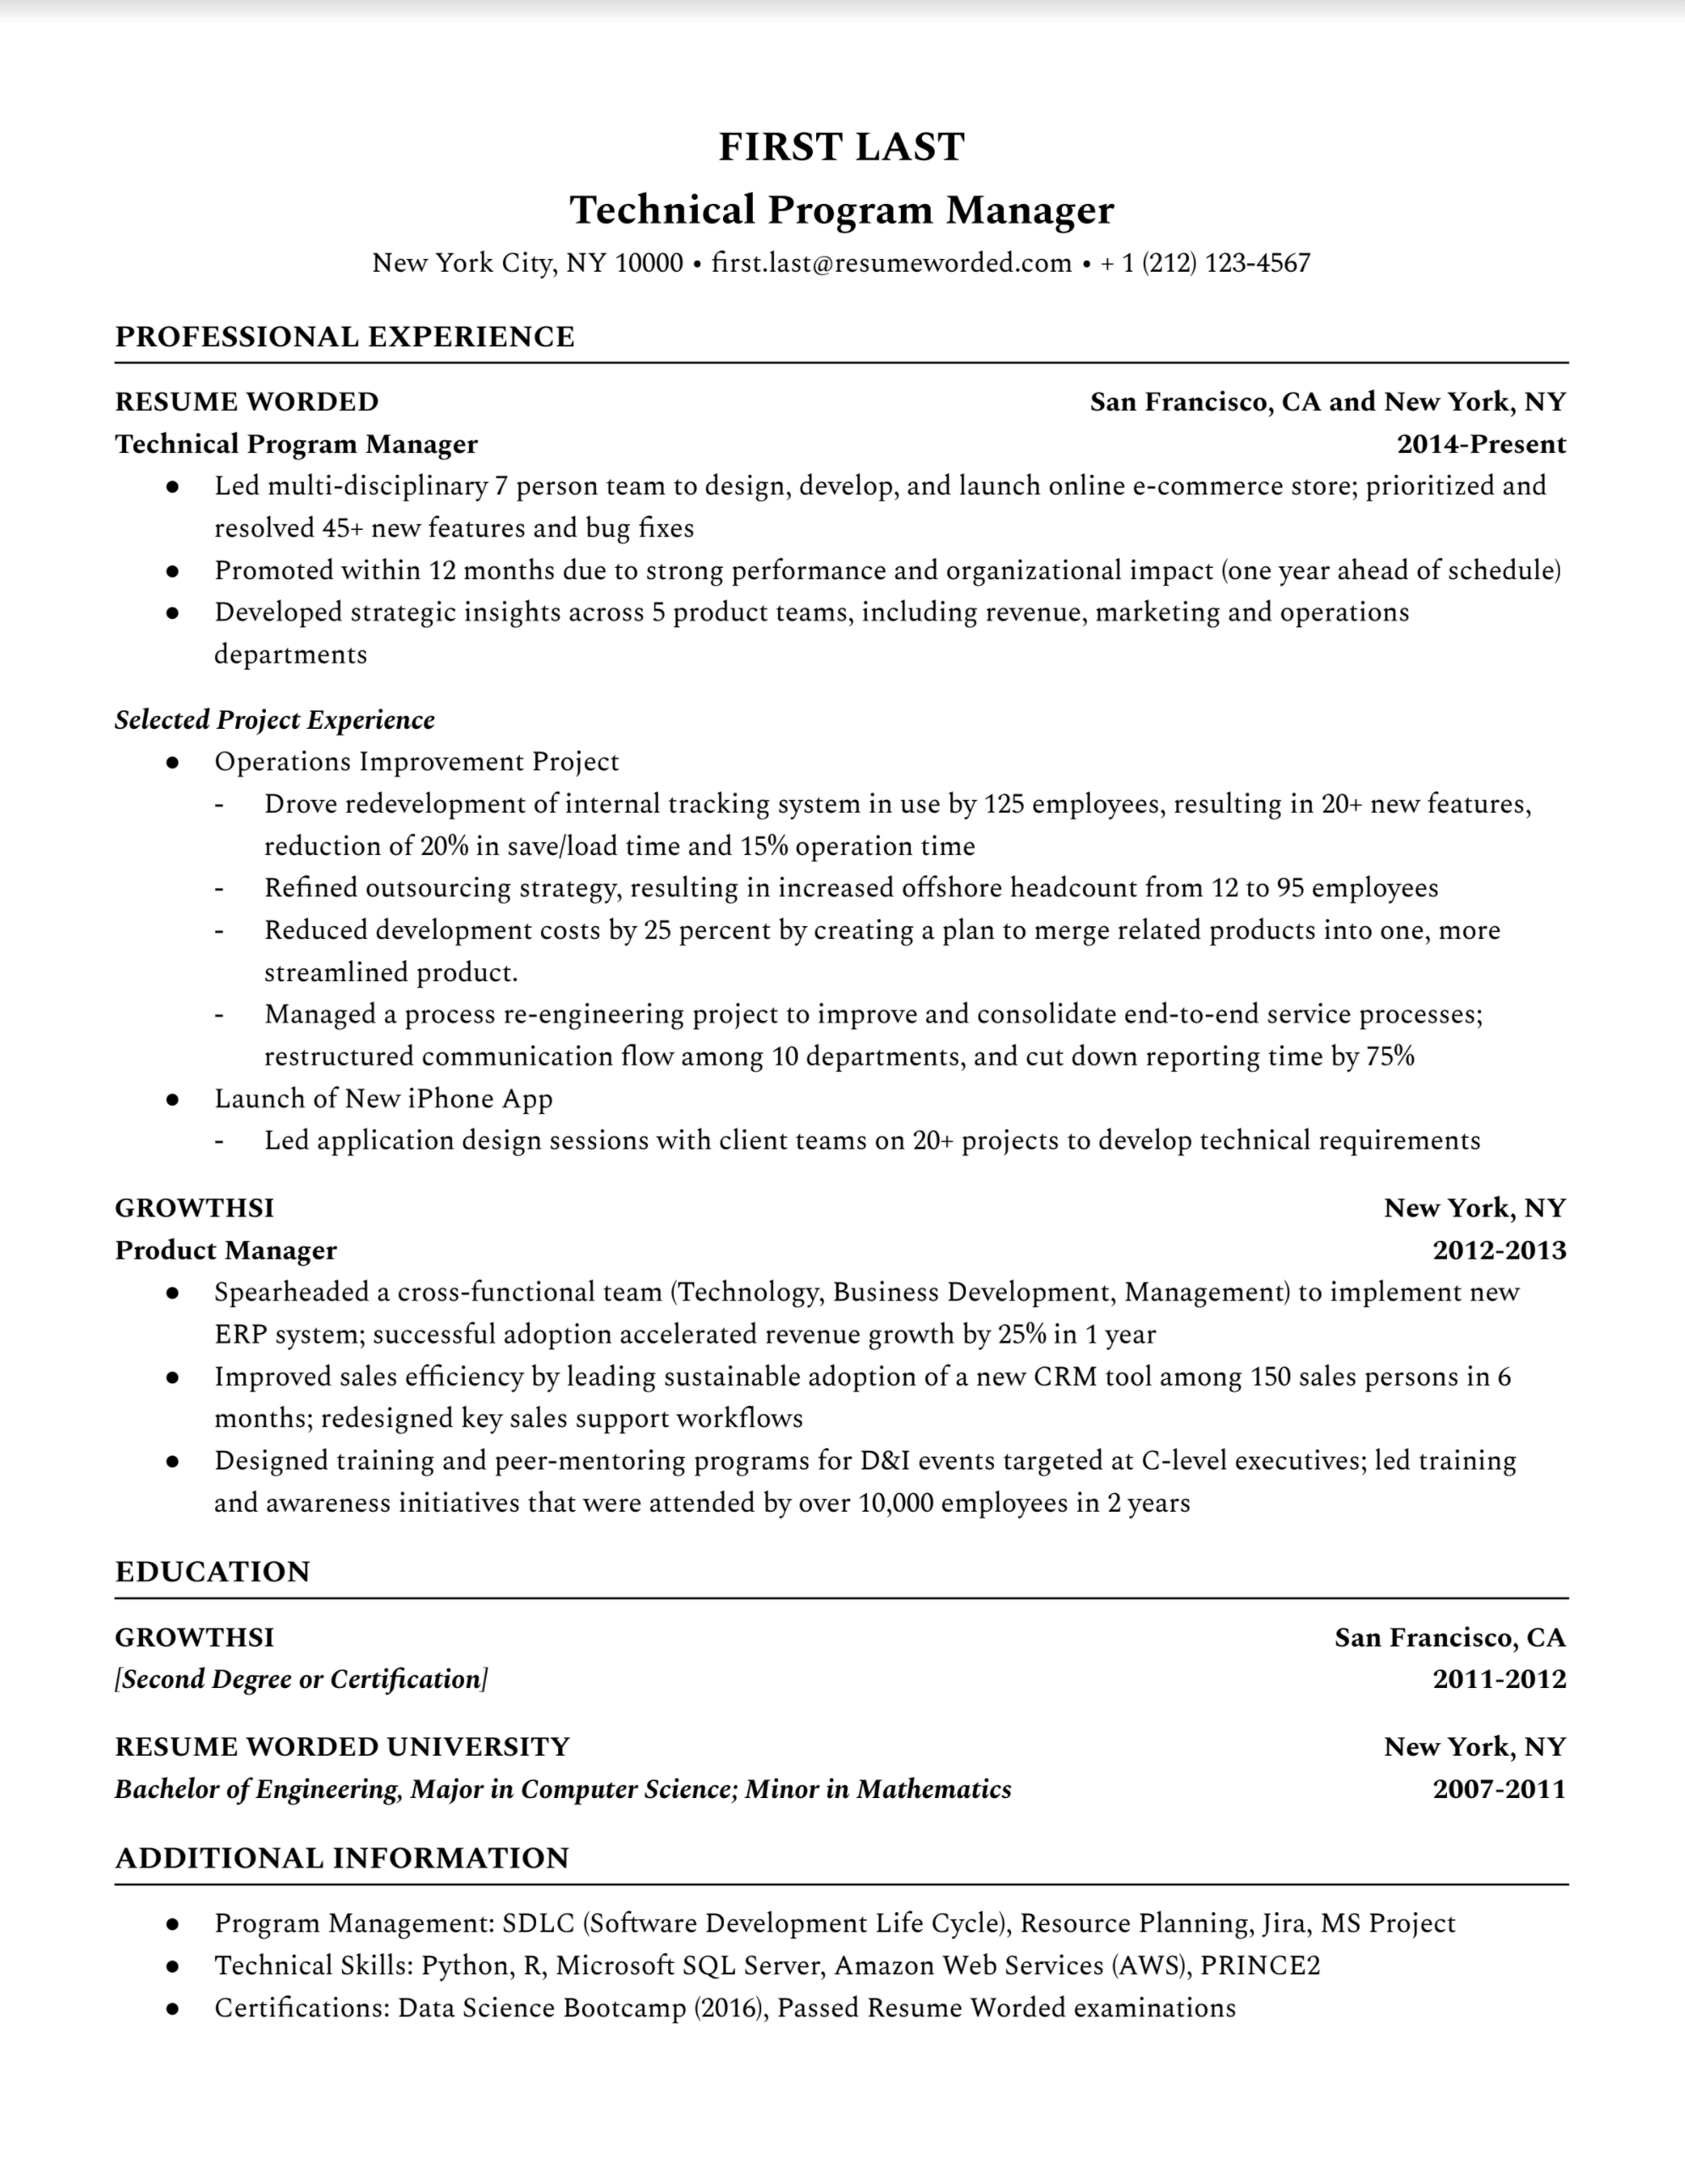 A technical program manager resume template with quantifiable achievements, simple bullet points and sub bullet points, technical skills and relevant certifications.